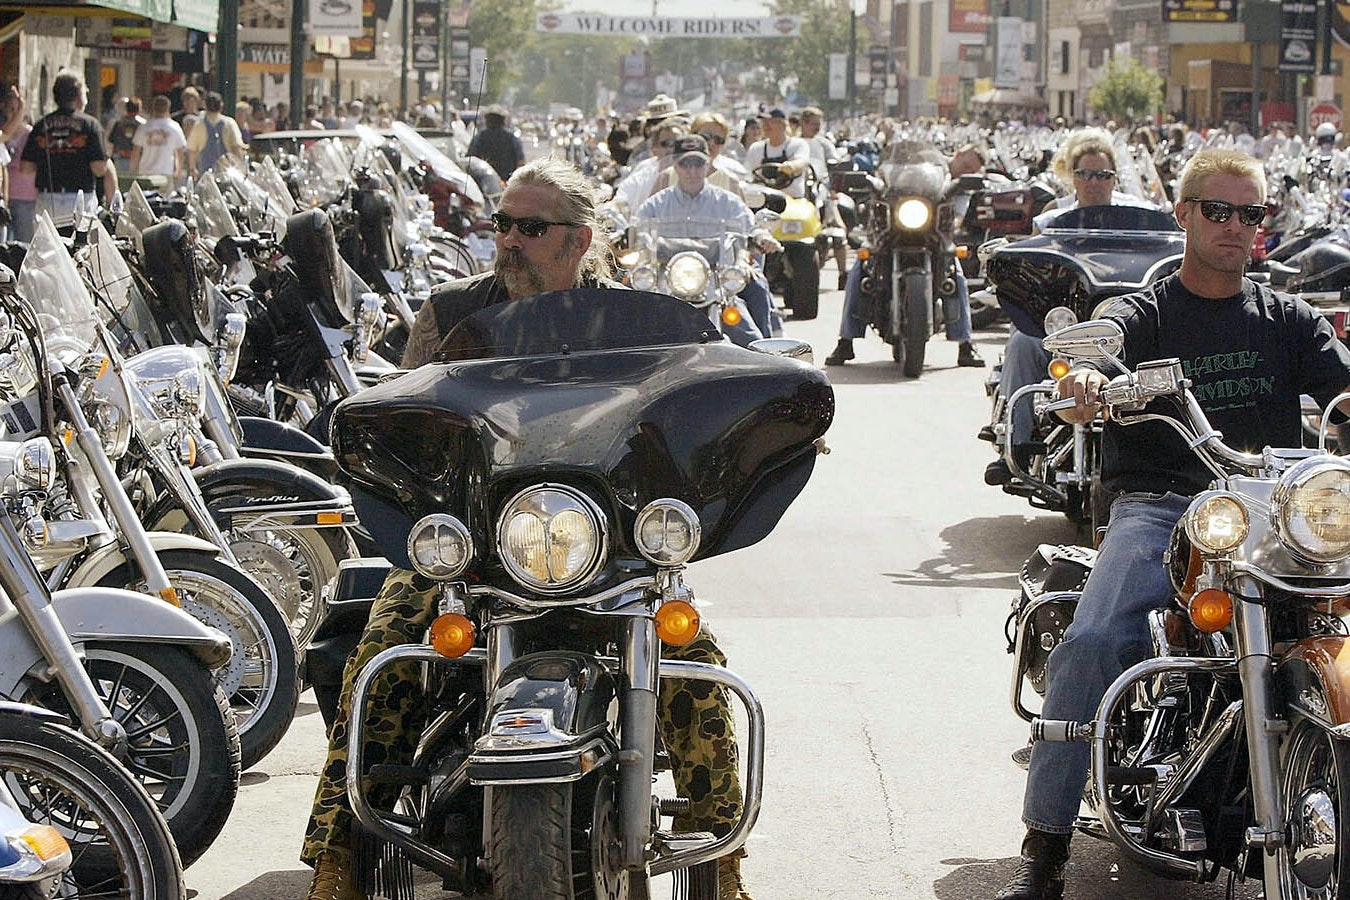 Bikers cruise during the annual Sturgis Motorcycle Rally down Main Street. The weeklong rally attracts an estimated 500,000 people to this town of 7,000 in the southwestern corner of the state.